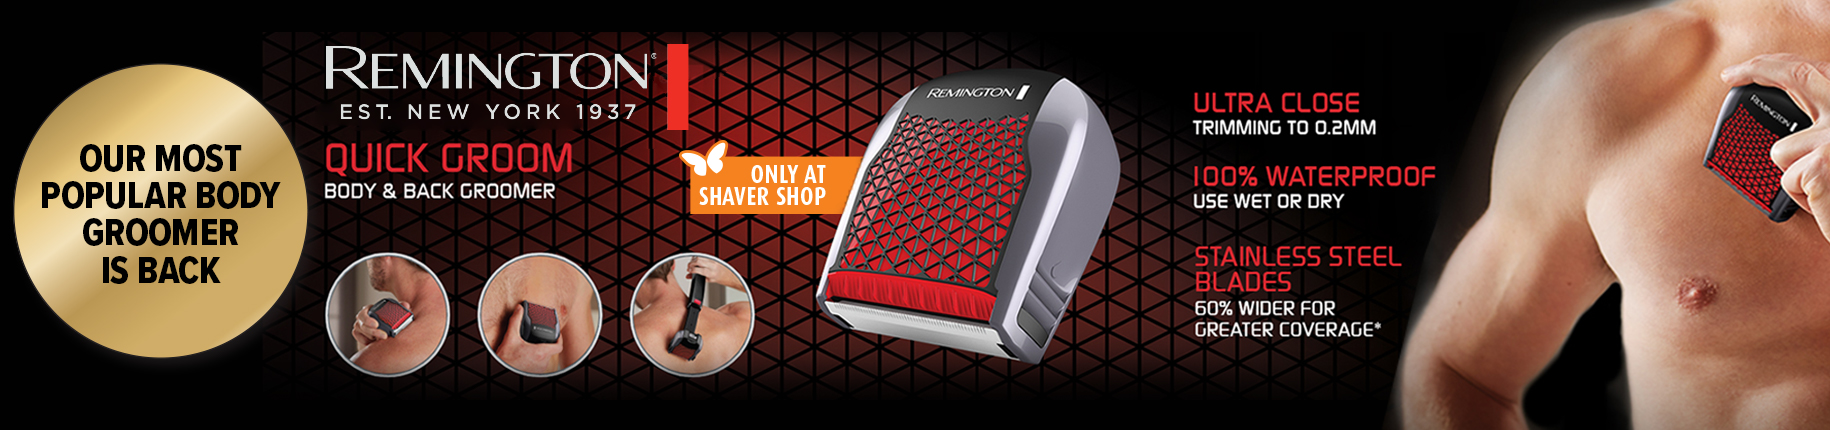 shaver shop body and back groomer